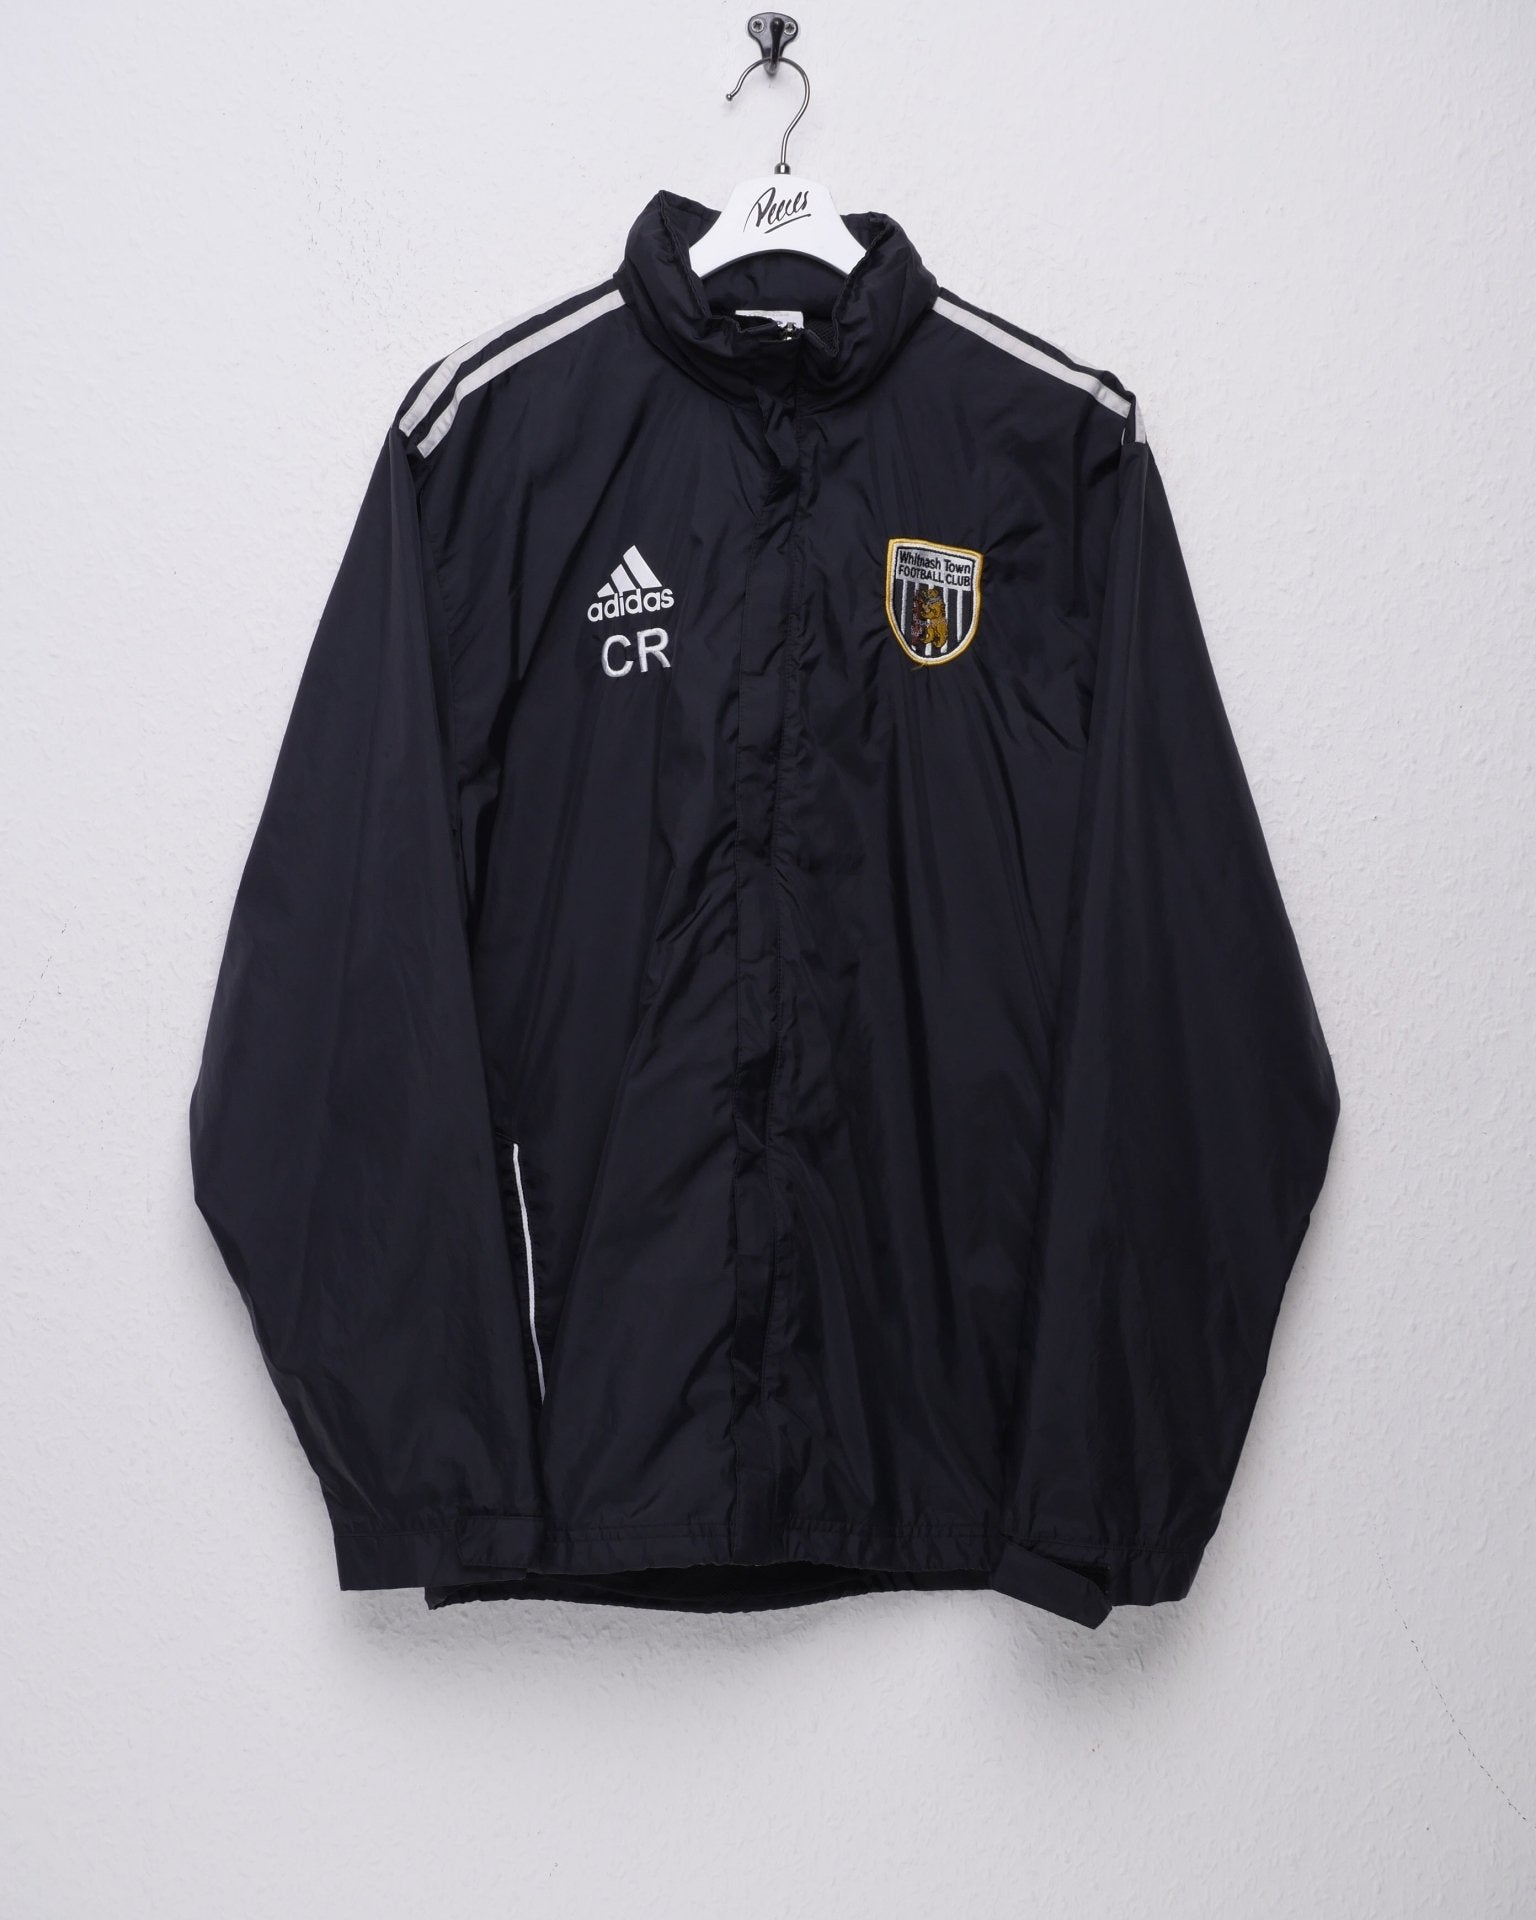 Adidas Whitnash Town FC embroidered Track Jacket - Peeces